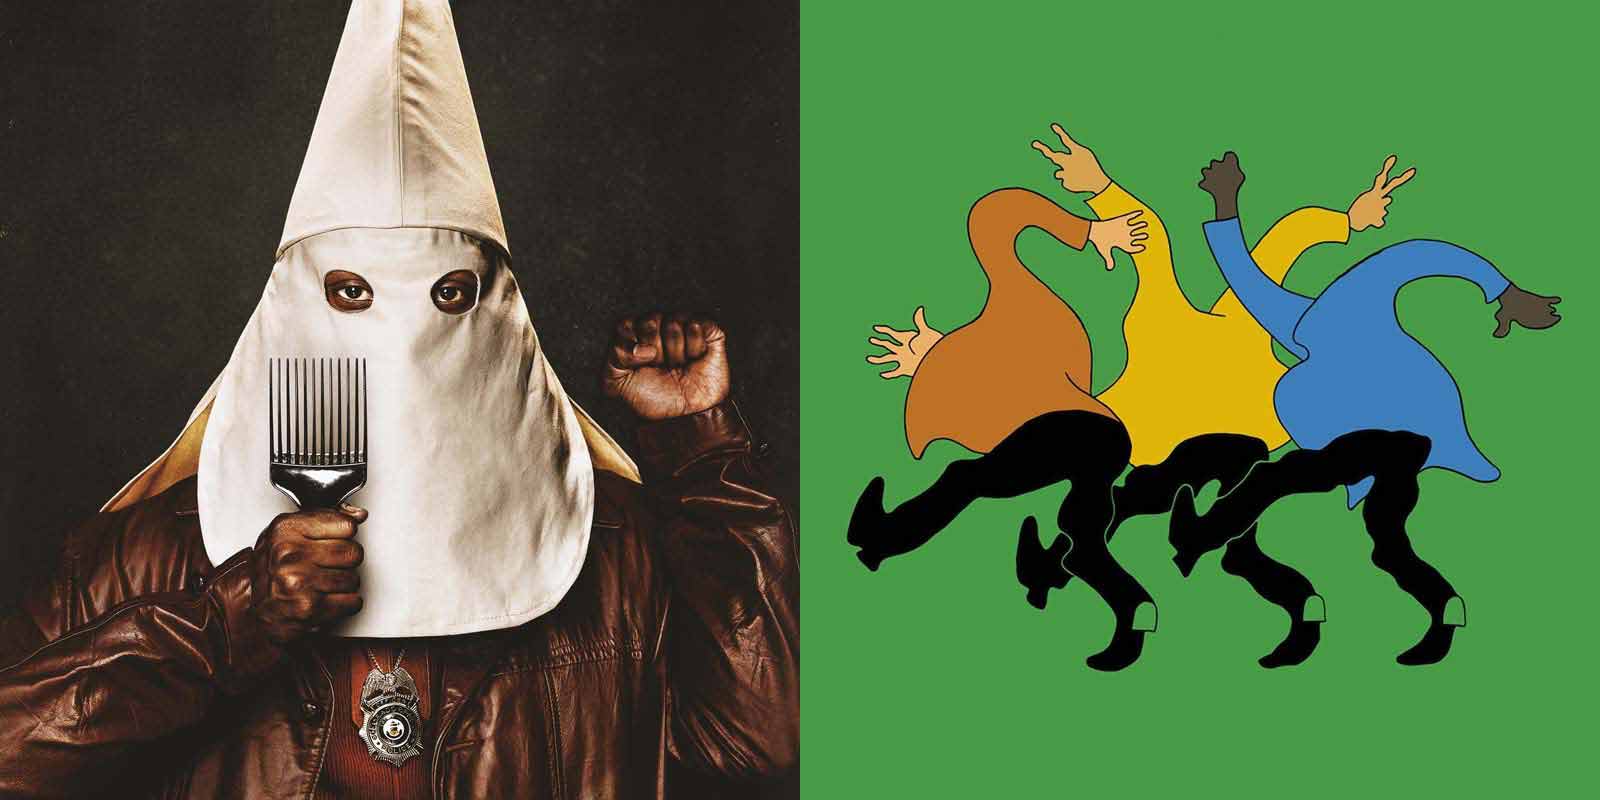 a black police officer wearing a white hood next to an illustration of people dancing